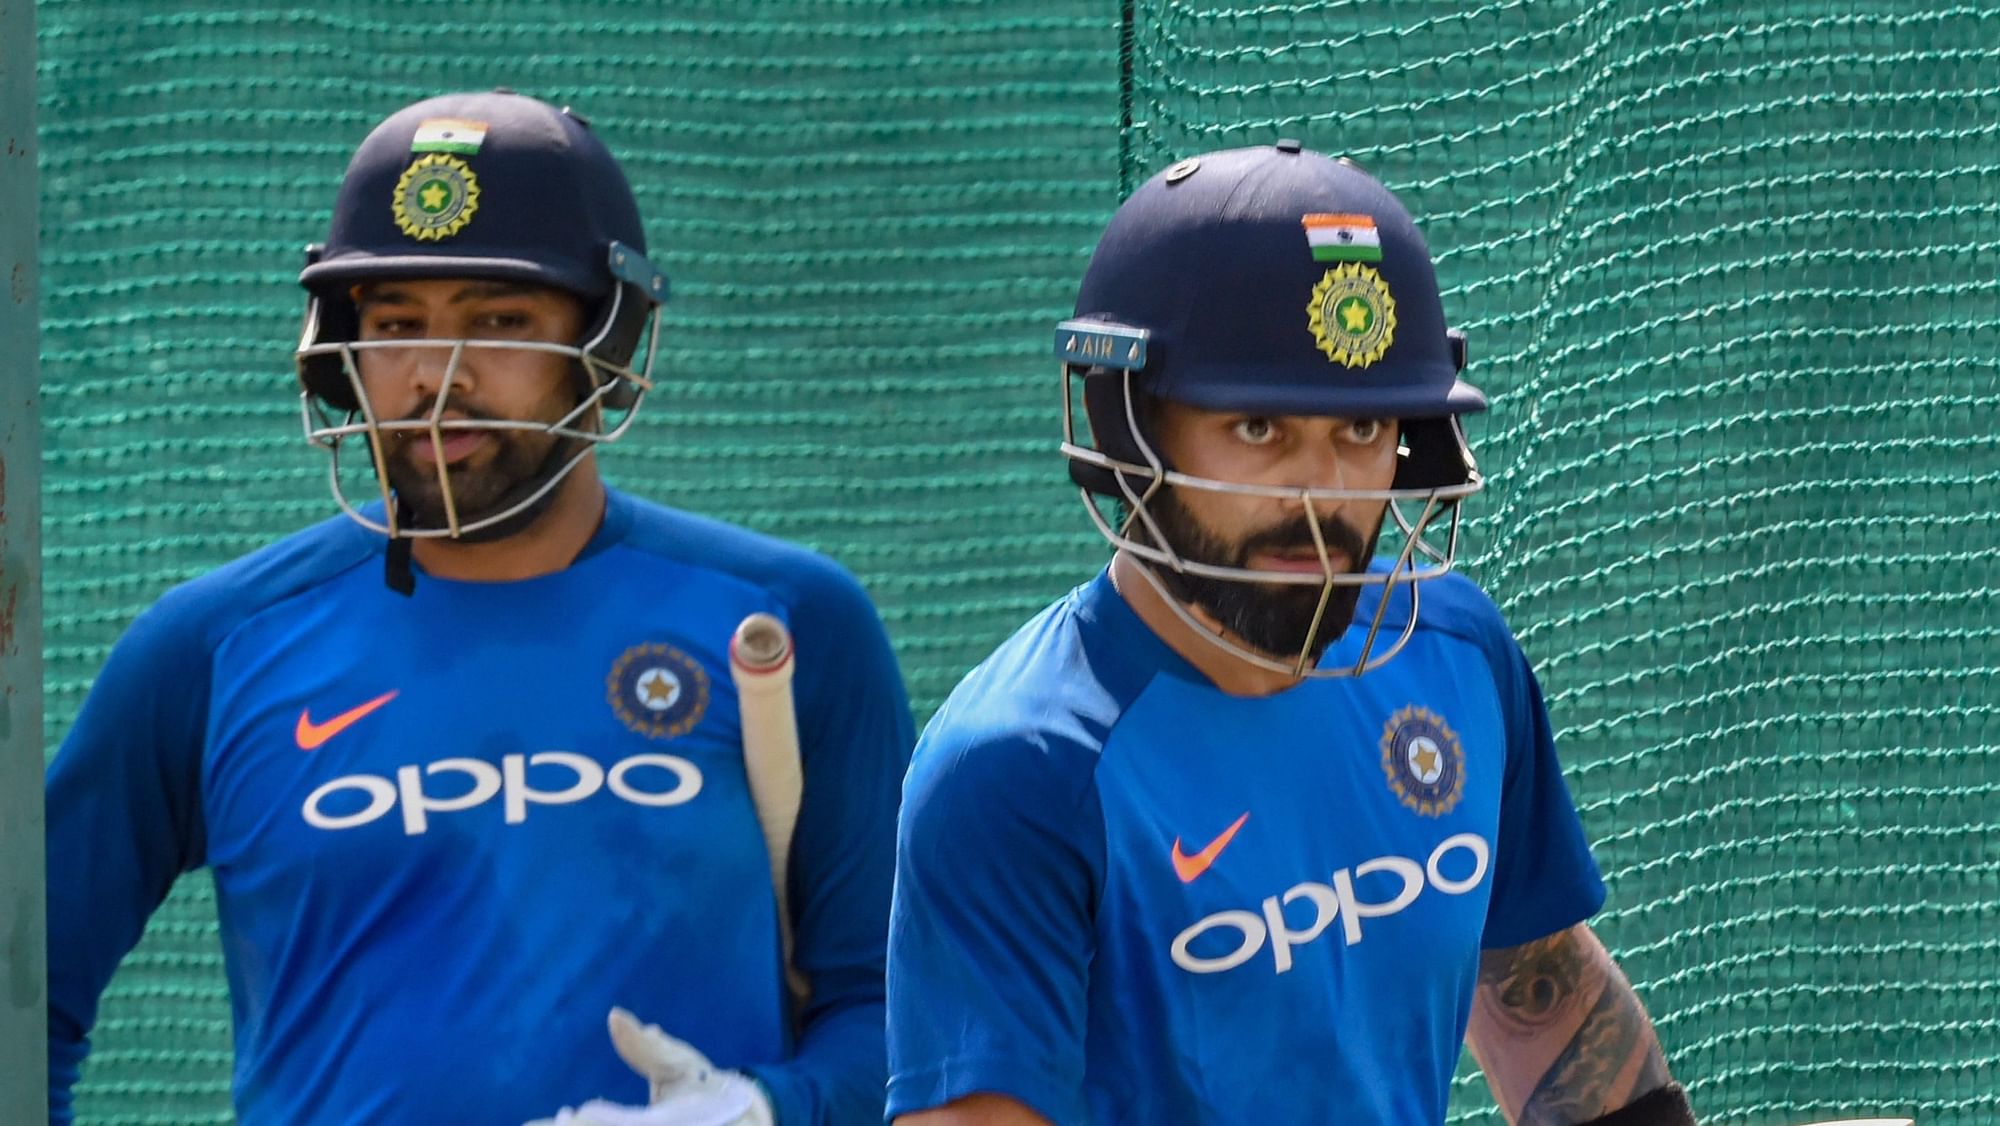 India vs New Zealand Match Today LIVE Streaming ICC Cricket World Cup 2019 Warm-up India Matches IND vs NZ, Live Cricket Score on Hotstar, Star Sports Network